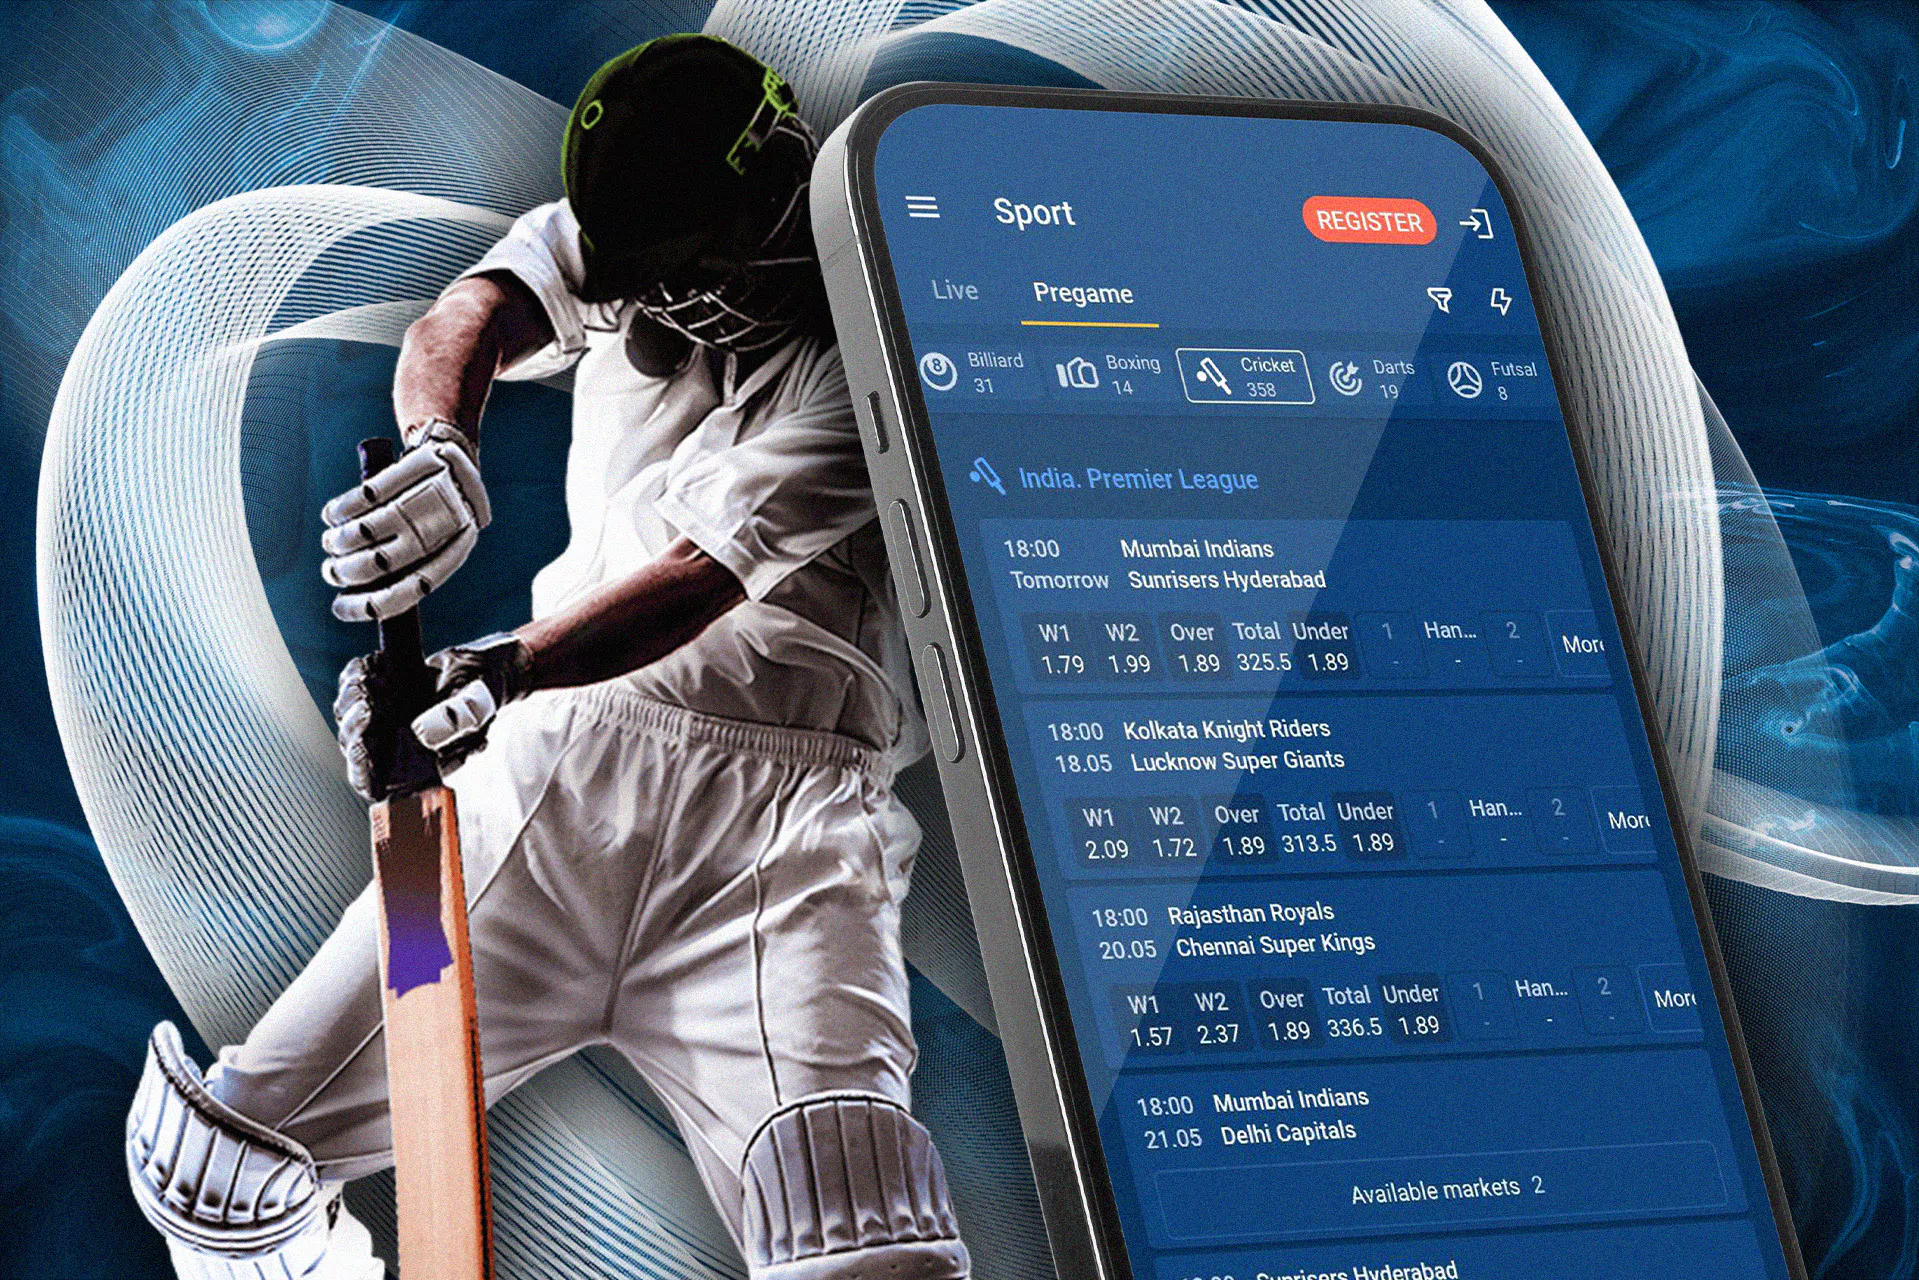 Mostbet mobile app, cricket betting section, IPL betting.